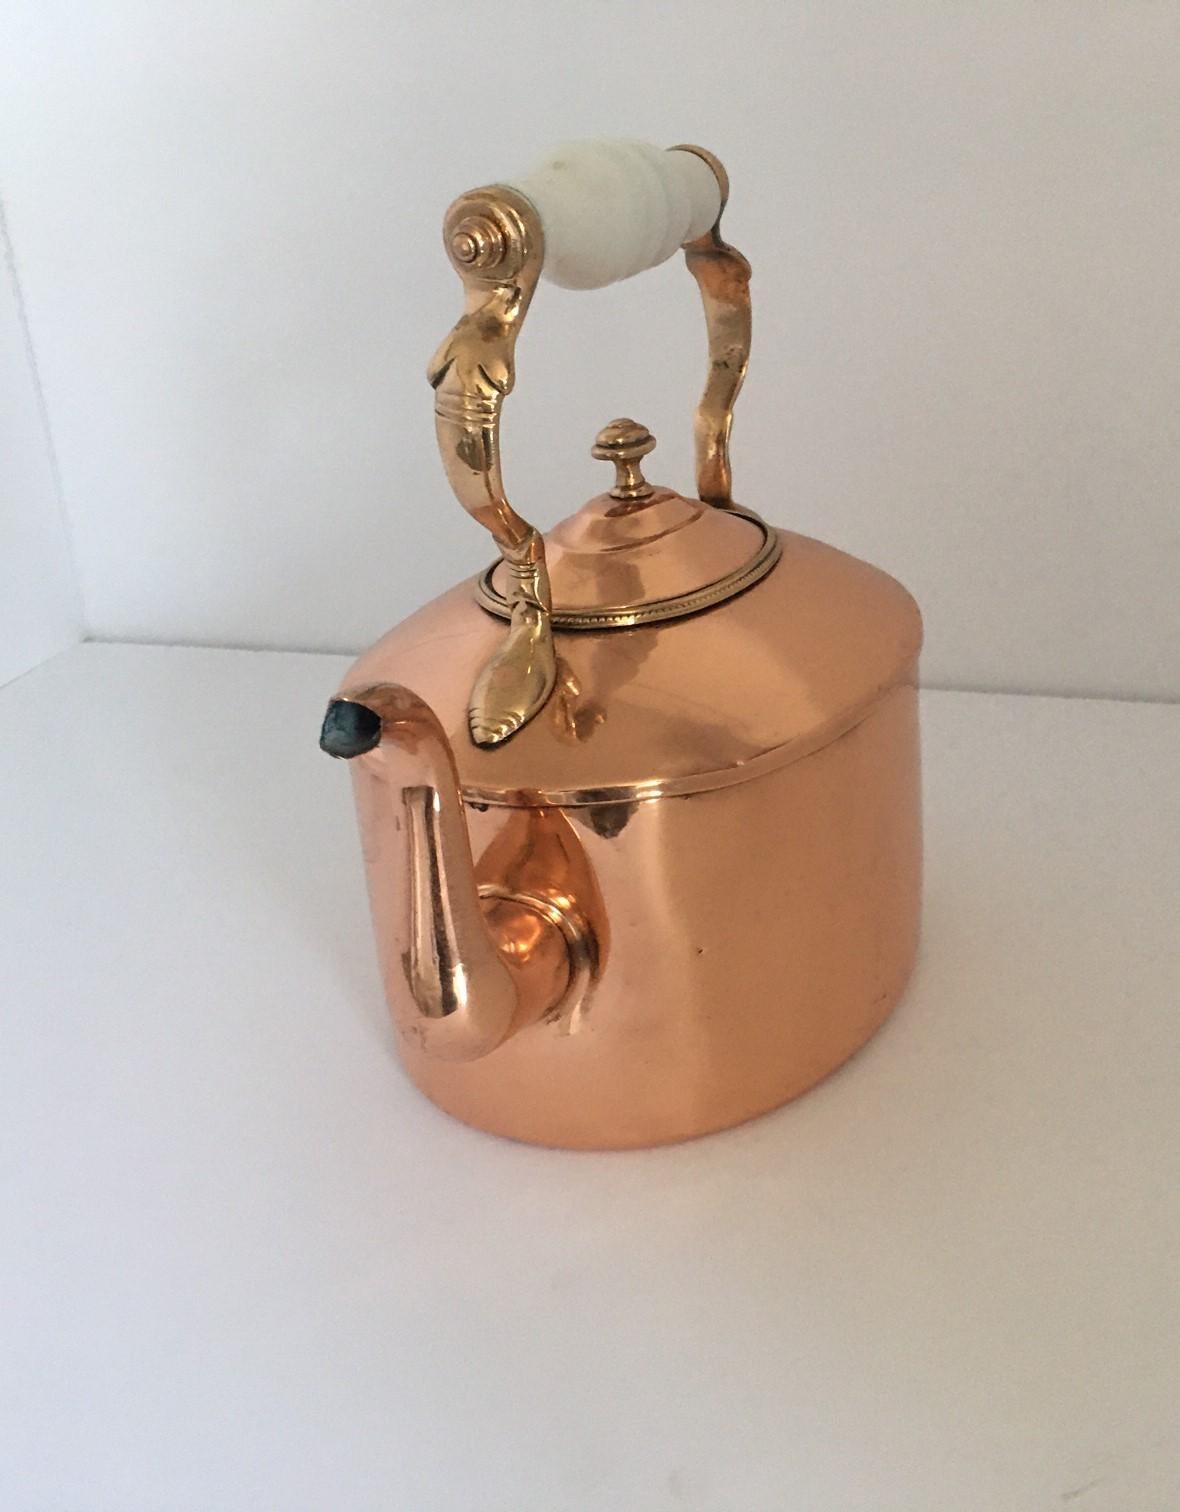 19th century English tea kettle the teapot. The handle is white porcelain with brass accents.